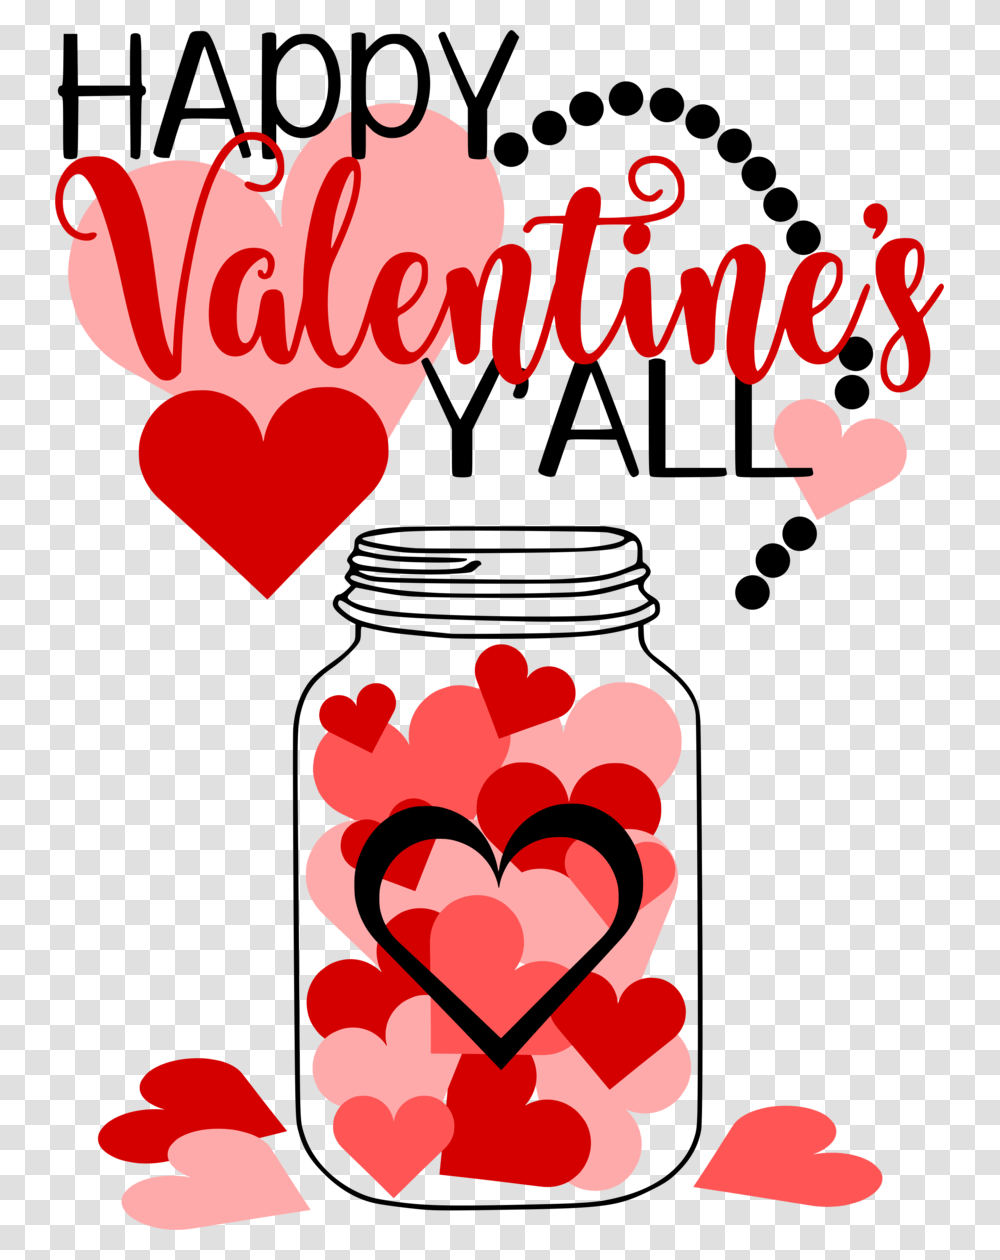 Happy Valentine's Day Y All, Heart, Floral Design Transparent Png